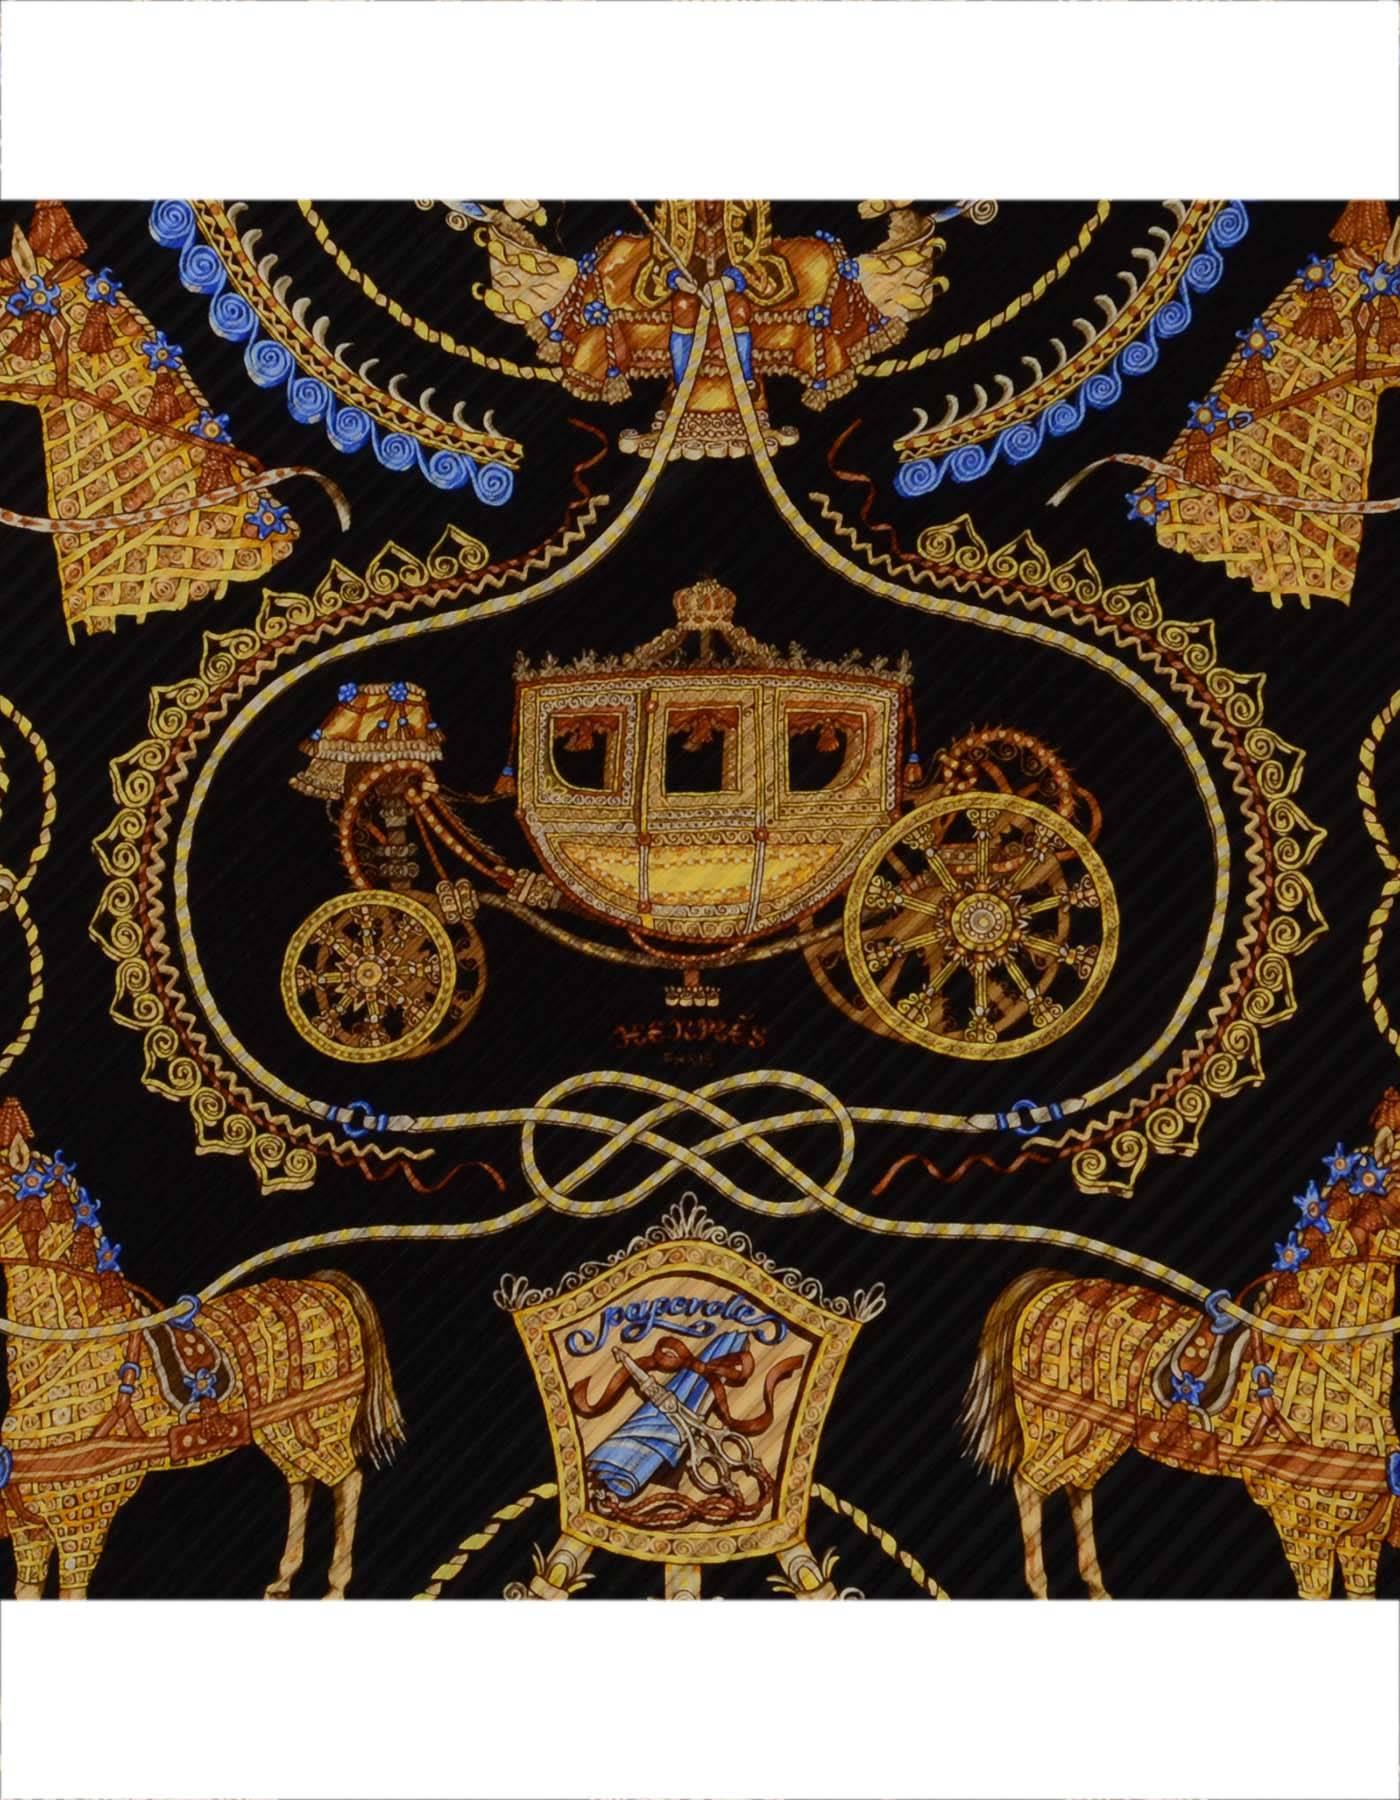 Hermes Black & Gold Paperoles Pleated 90cm Silk Scarf
Features horses and a chariot printed throughout
Made In: France
Color: Black, gold and pale blue
Composition: 100% silk
Overall Condition: Excellent pre-owned condition
Includes: Hermes